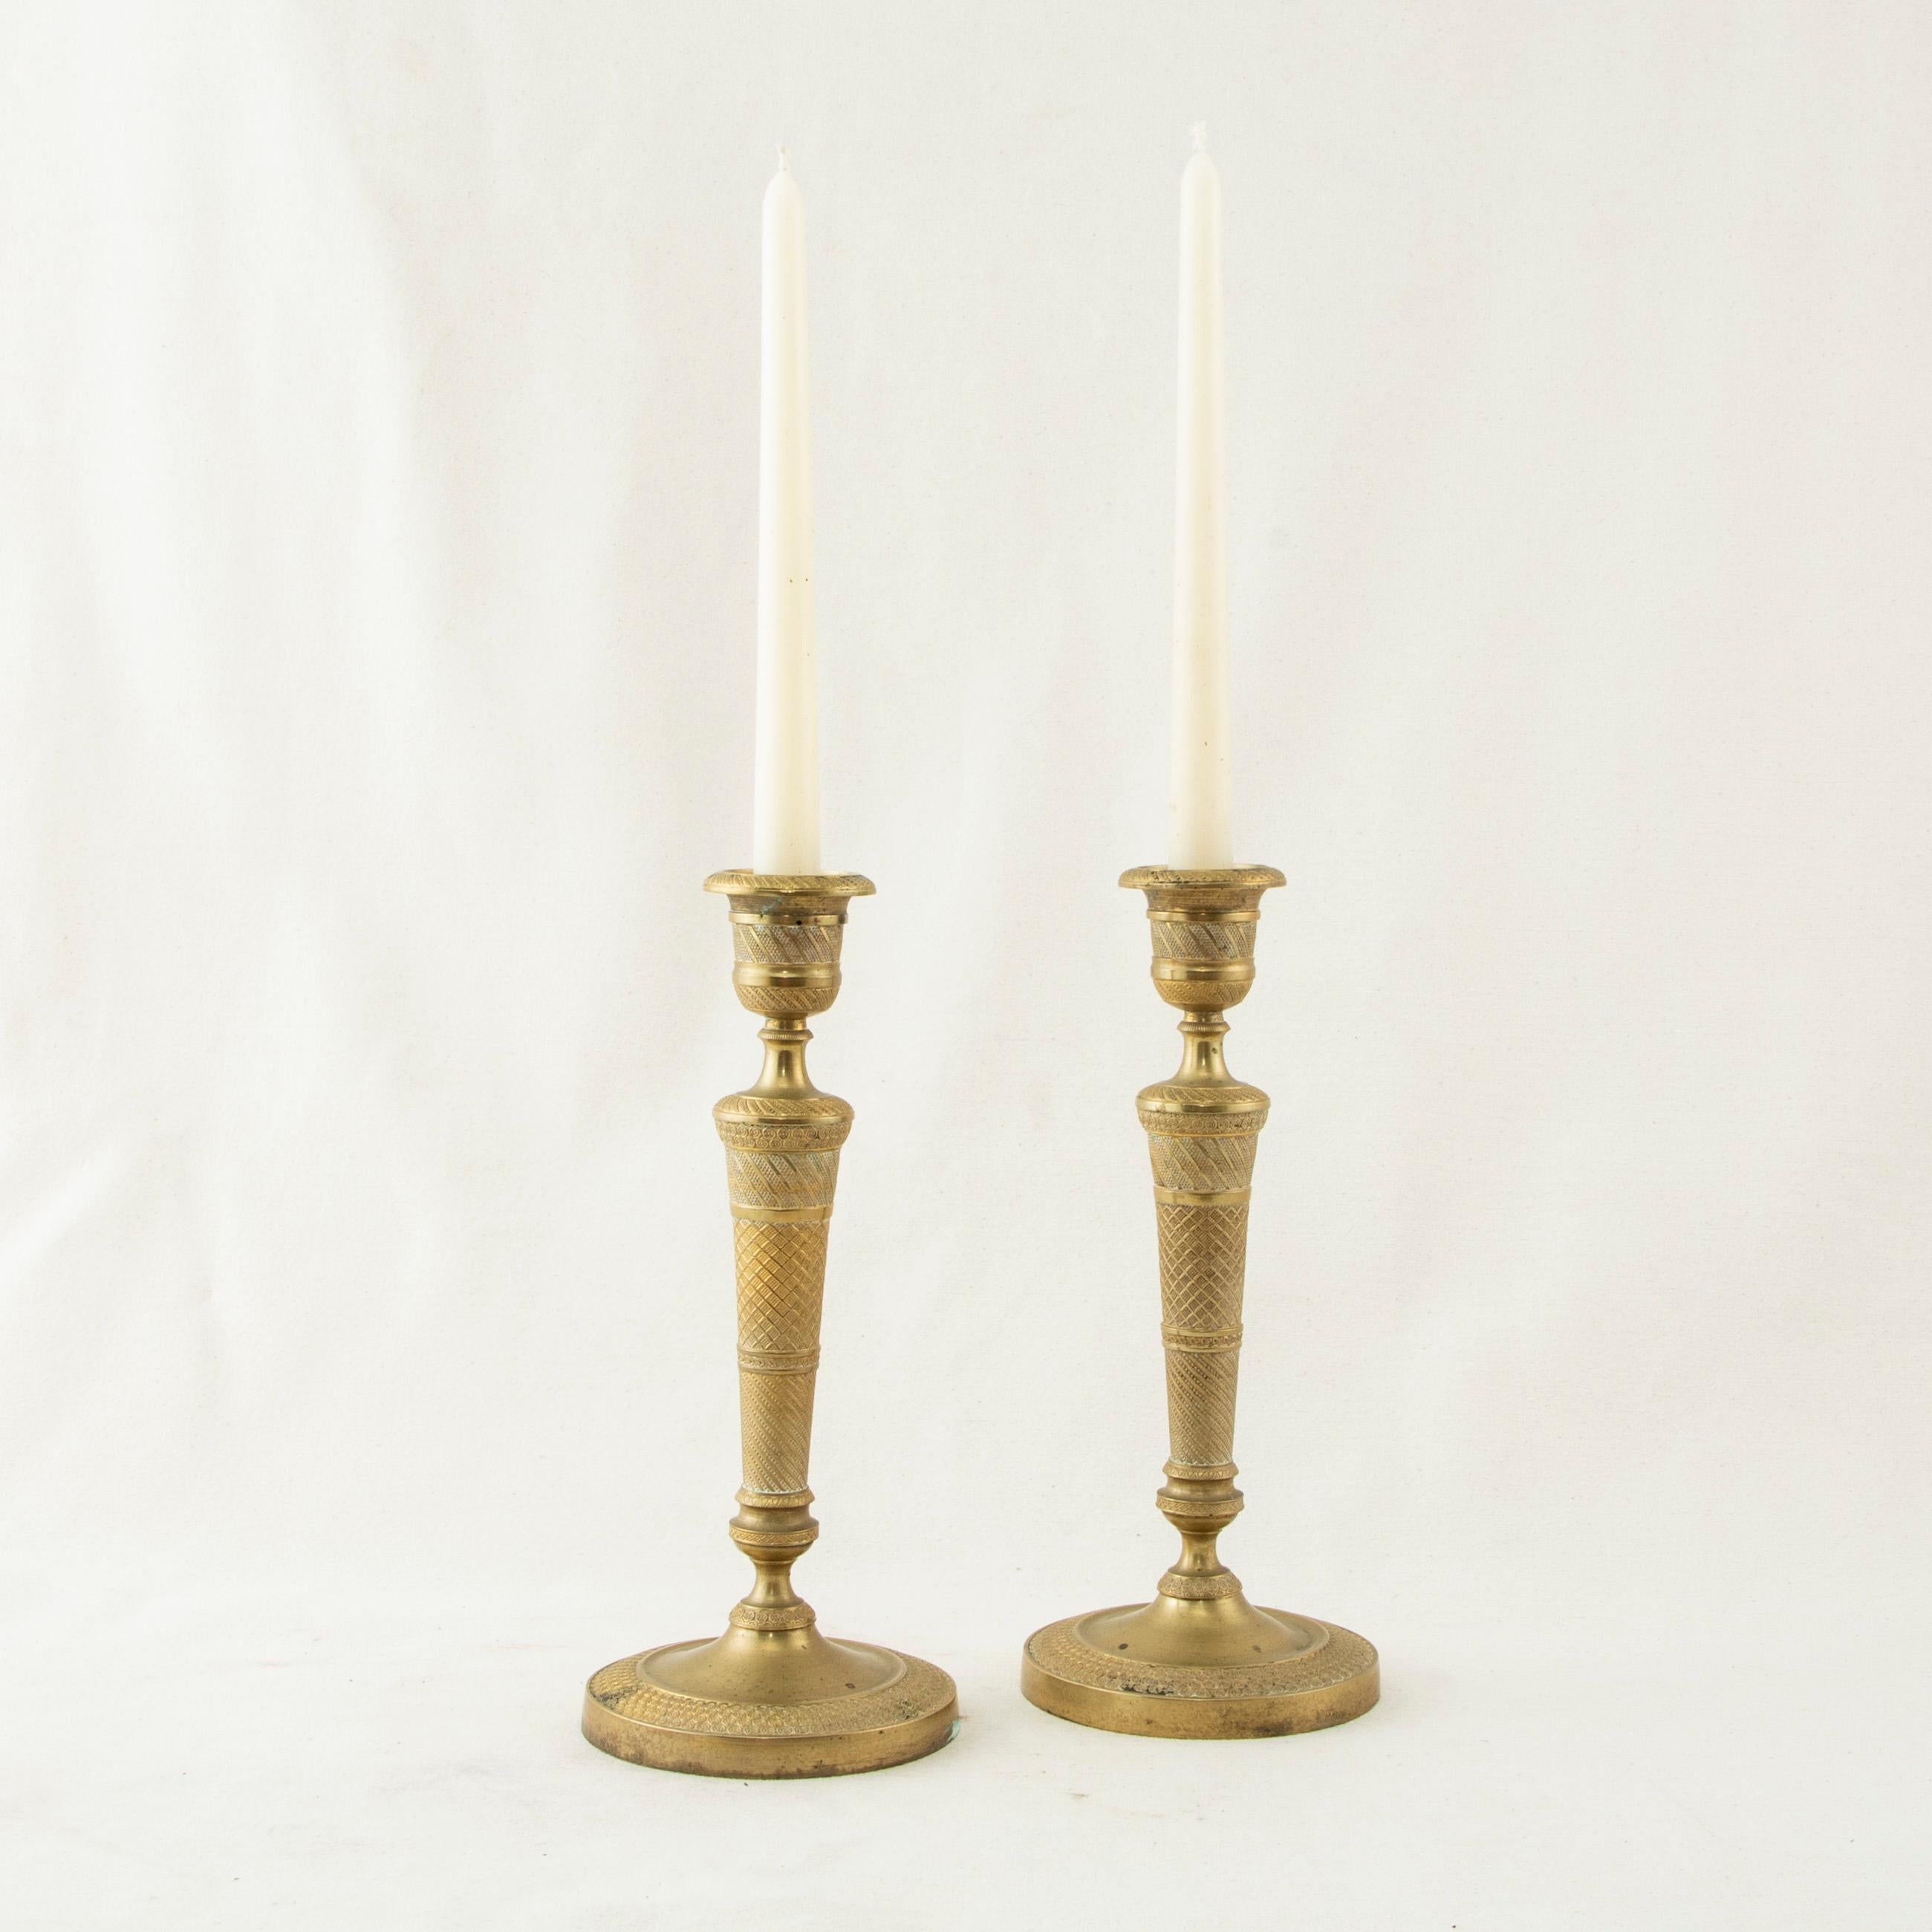 Pair of Early 19th Century French Restauration Period Bronze Candlesticks 2